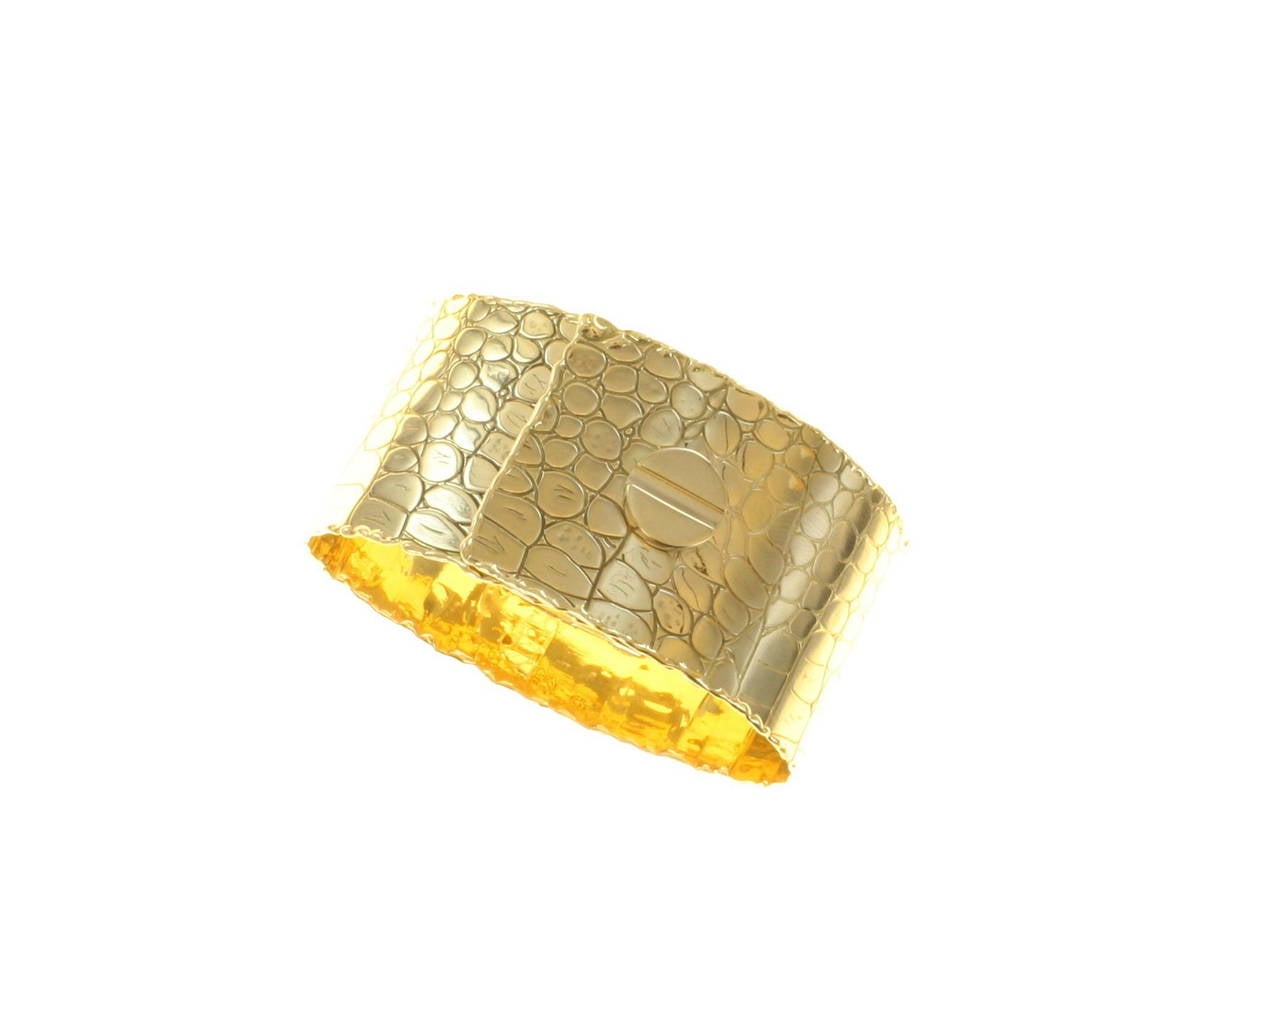 Stunning 18kt solid yellow gold Cuff.
Alligator pattern with signature Cipullo screw motif
Hidden closure
1 1/8 (28mm) width
Weight 38.8 Dwt
Inside circumference 6 3/4 inches